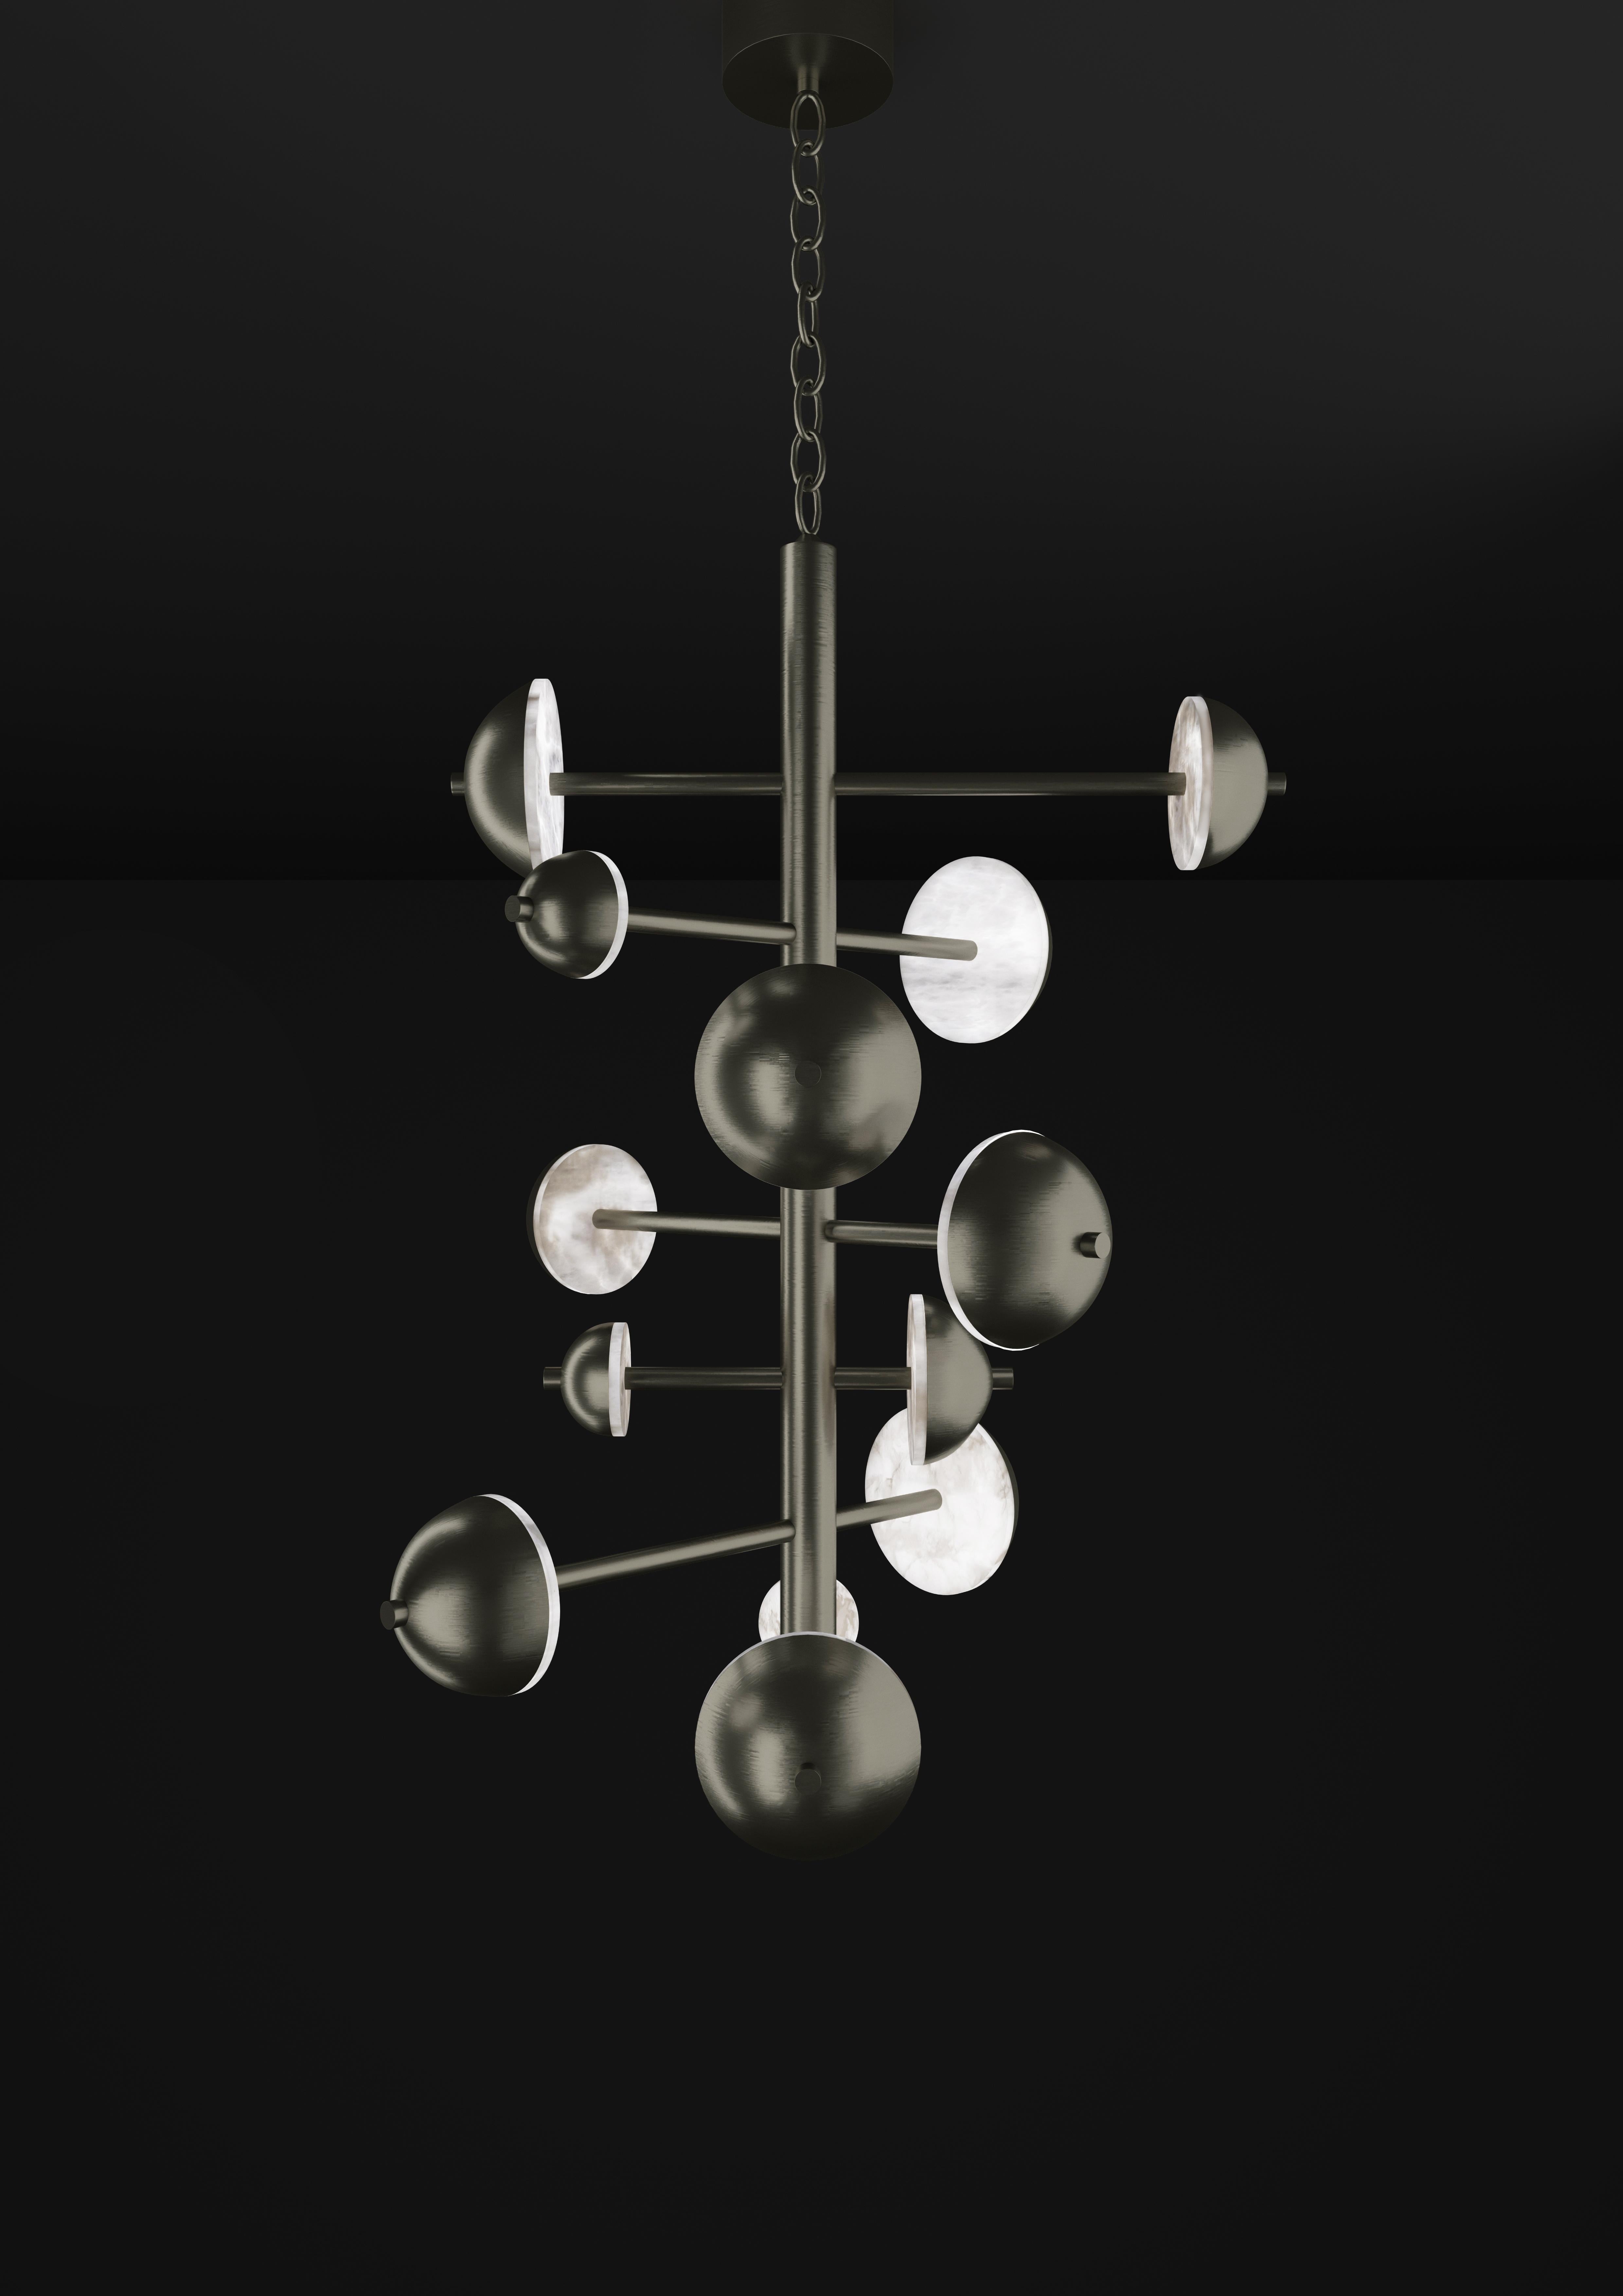 Ares Brushed Black Metal Chandelier by Alabastro Italiano
Dimensions: D 74,5 x W 73 x H 110 cm.
Materials: White alabaster and metal.

Available in different finishes: Shiny Silver, Bronze, Brushed Brass, Ruggine of Florence, Brushed Burnished,